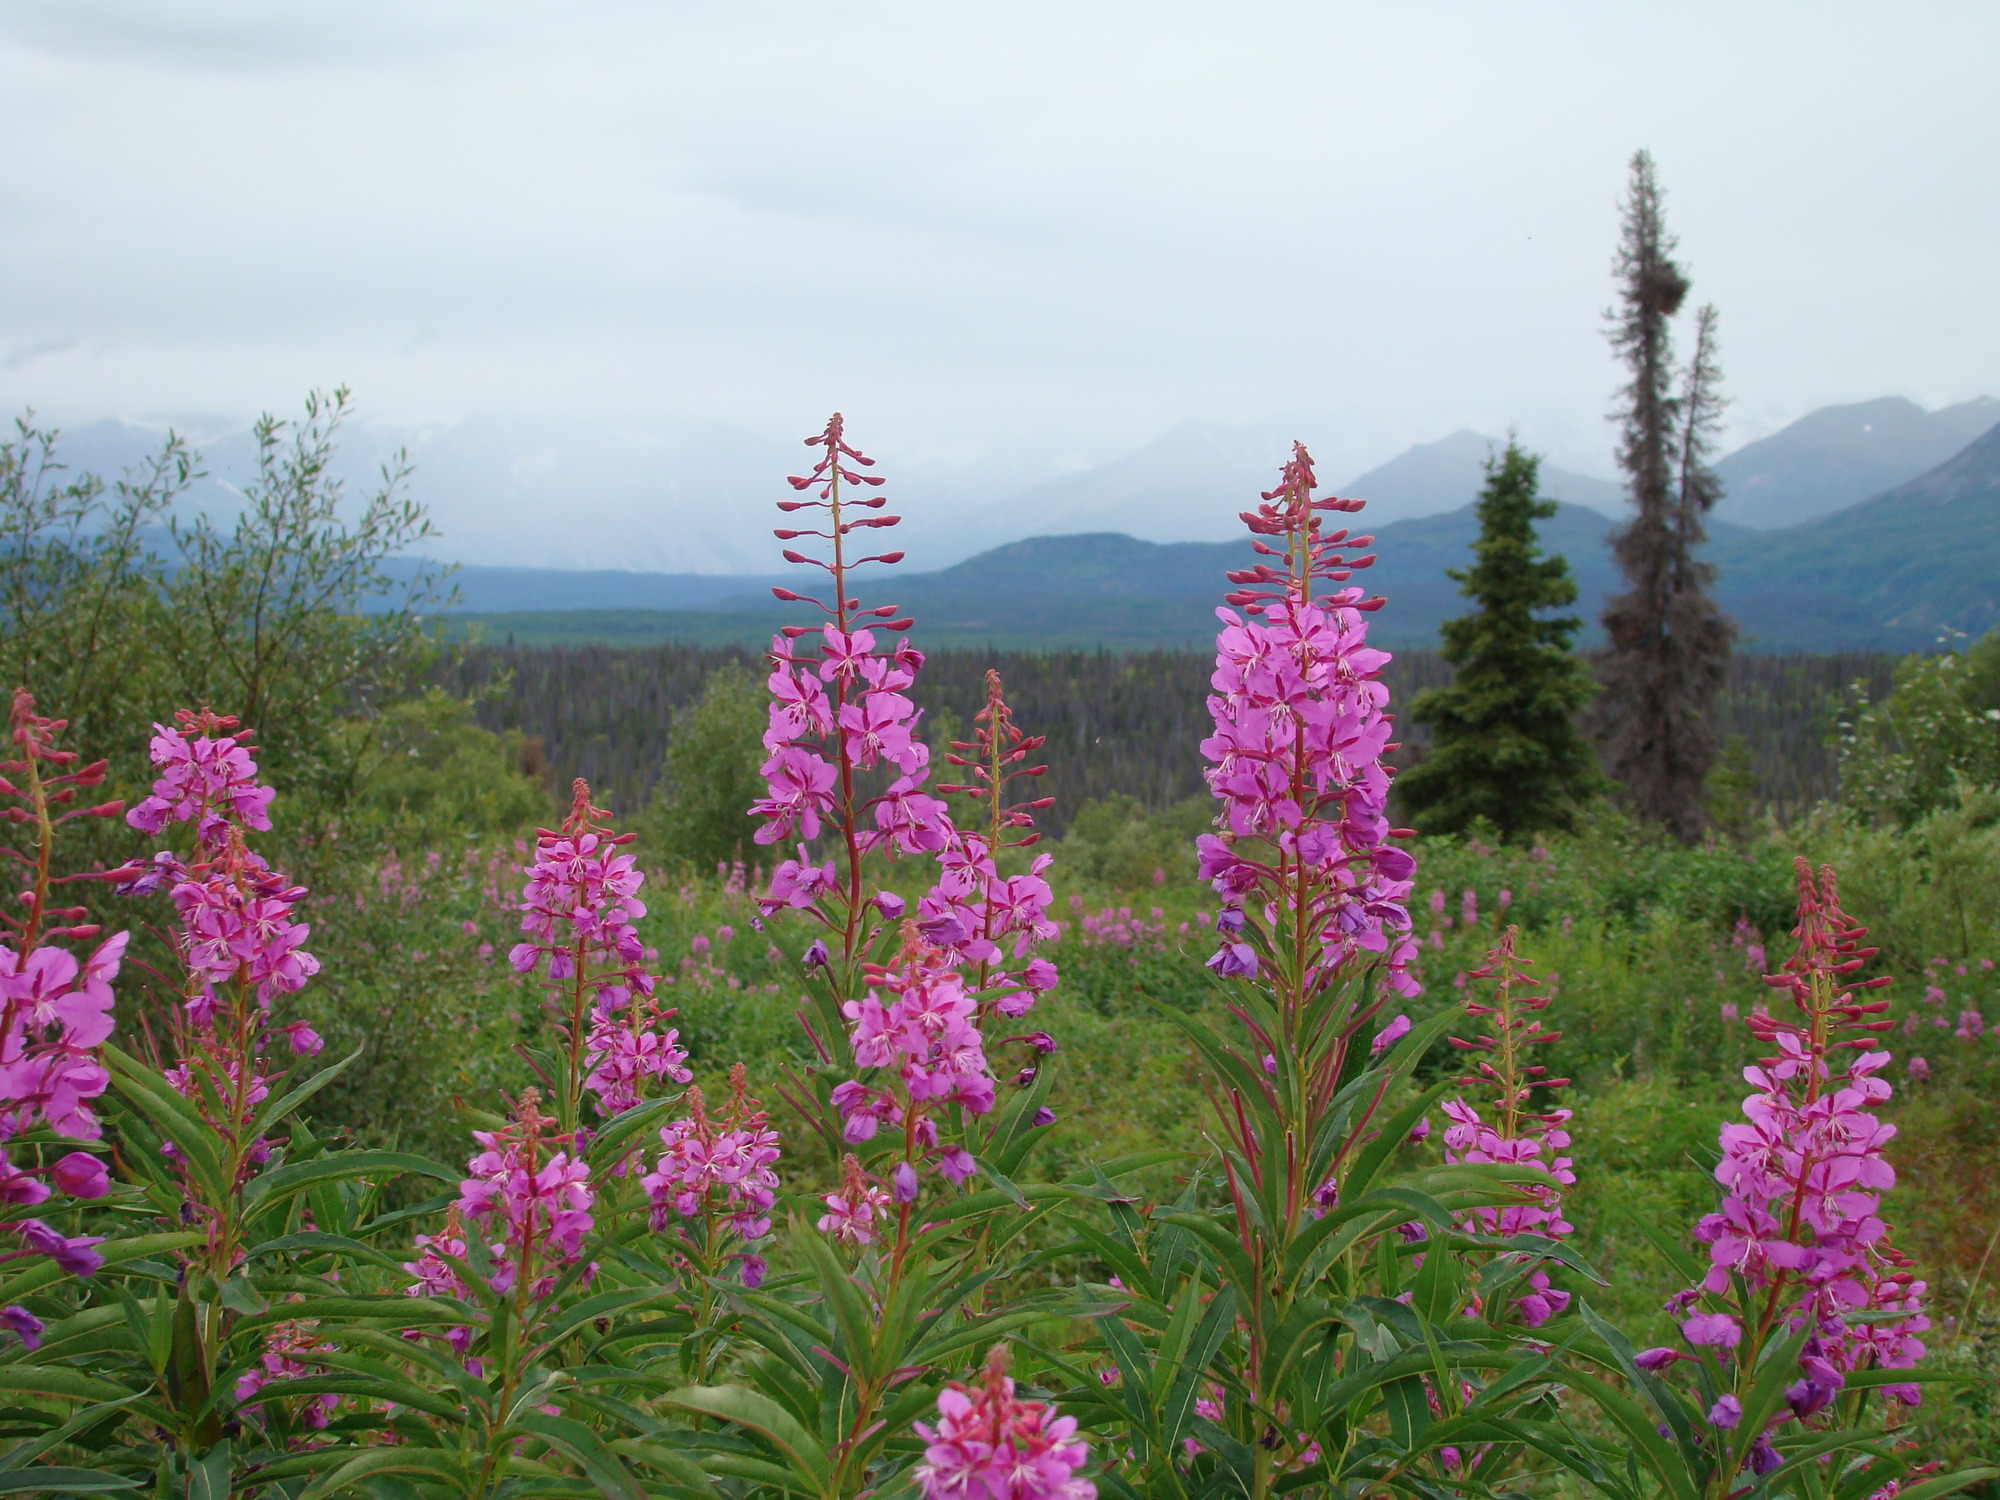 Pink fireweed clusters can be seen in the foreground. Mountains fade into the background in different layers of blue.